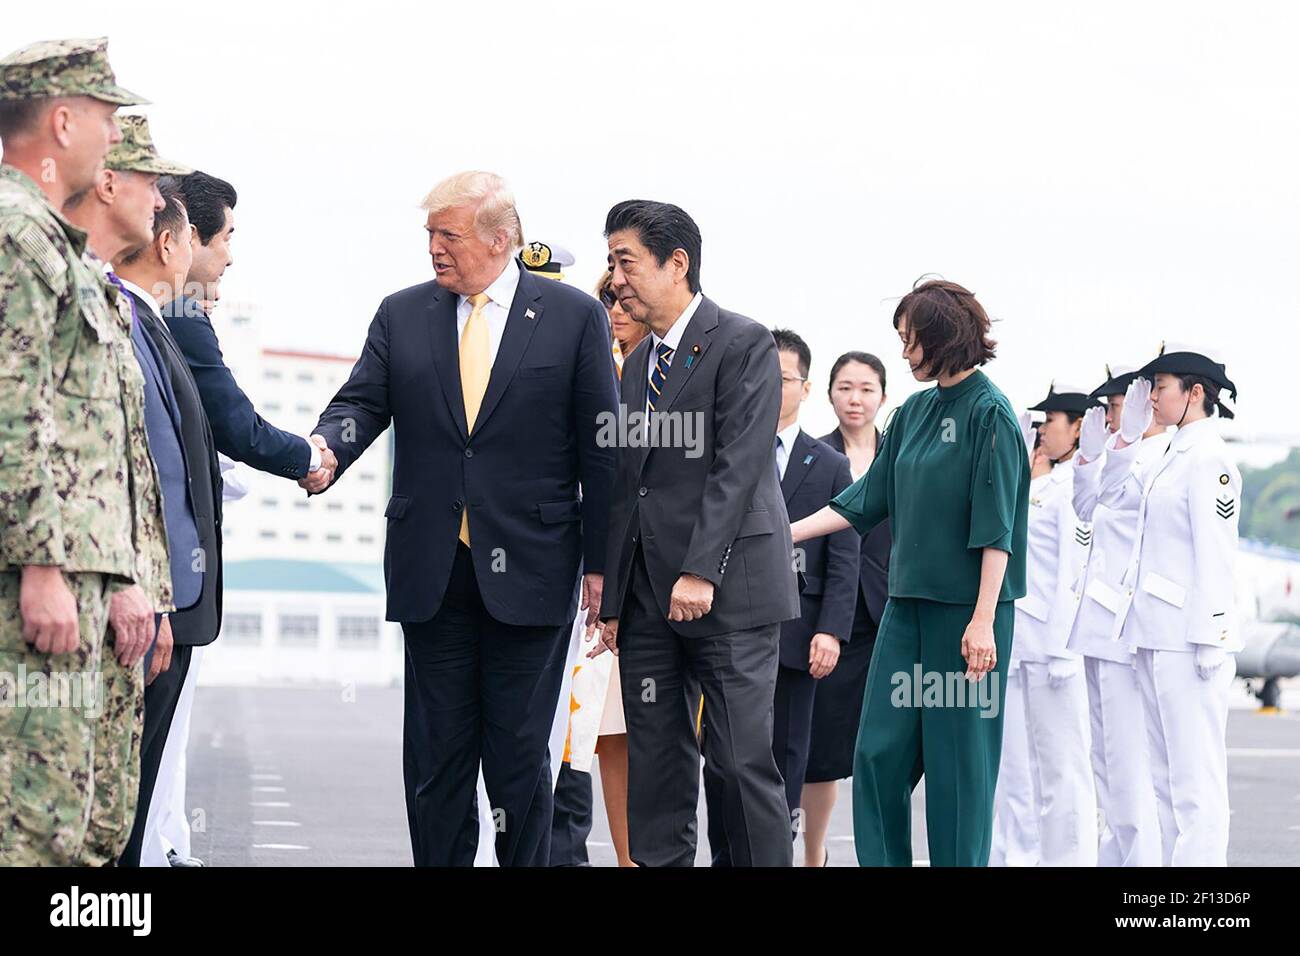 President Donald Trump joined by the Prime Minister of Japan Shinzo Abe arrive aboard the JS Kaga Tuesday May 28 2019 in Yokosuka Japan. Stock Photo